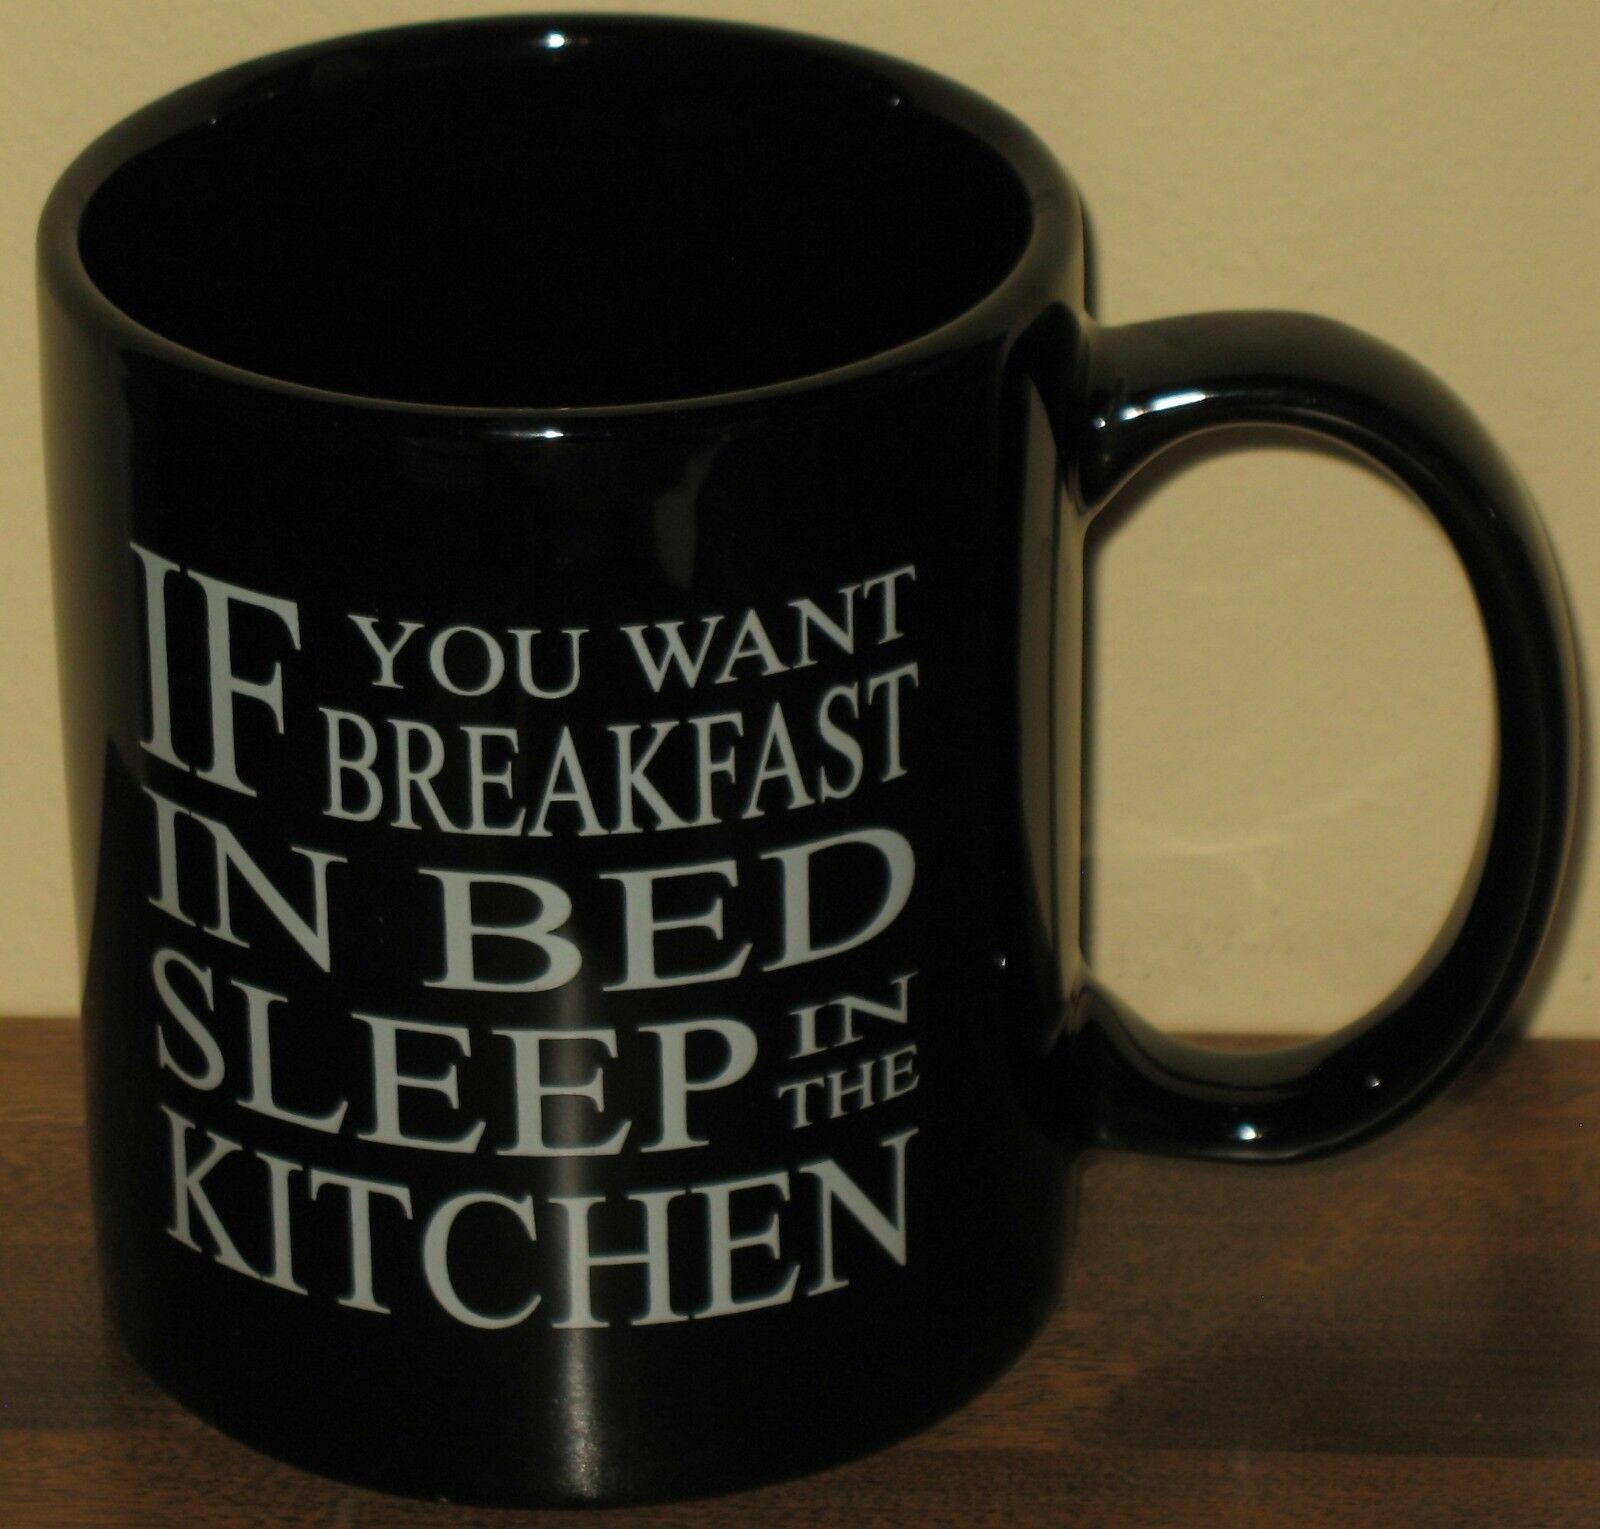 If You Want Breakfast in Bed Sleep in the Kitchen Black Coffee Mug Cup